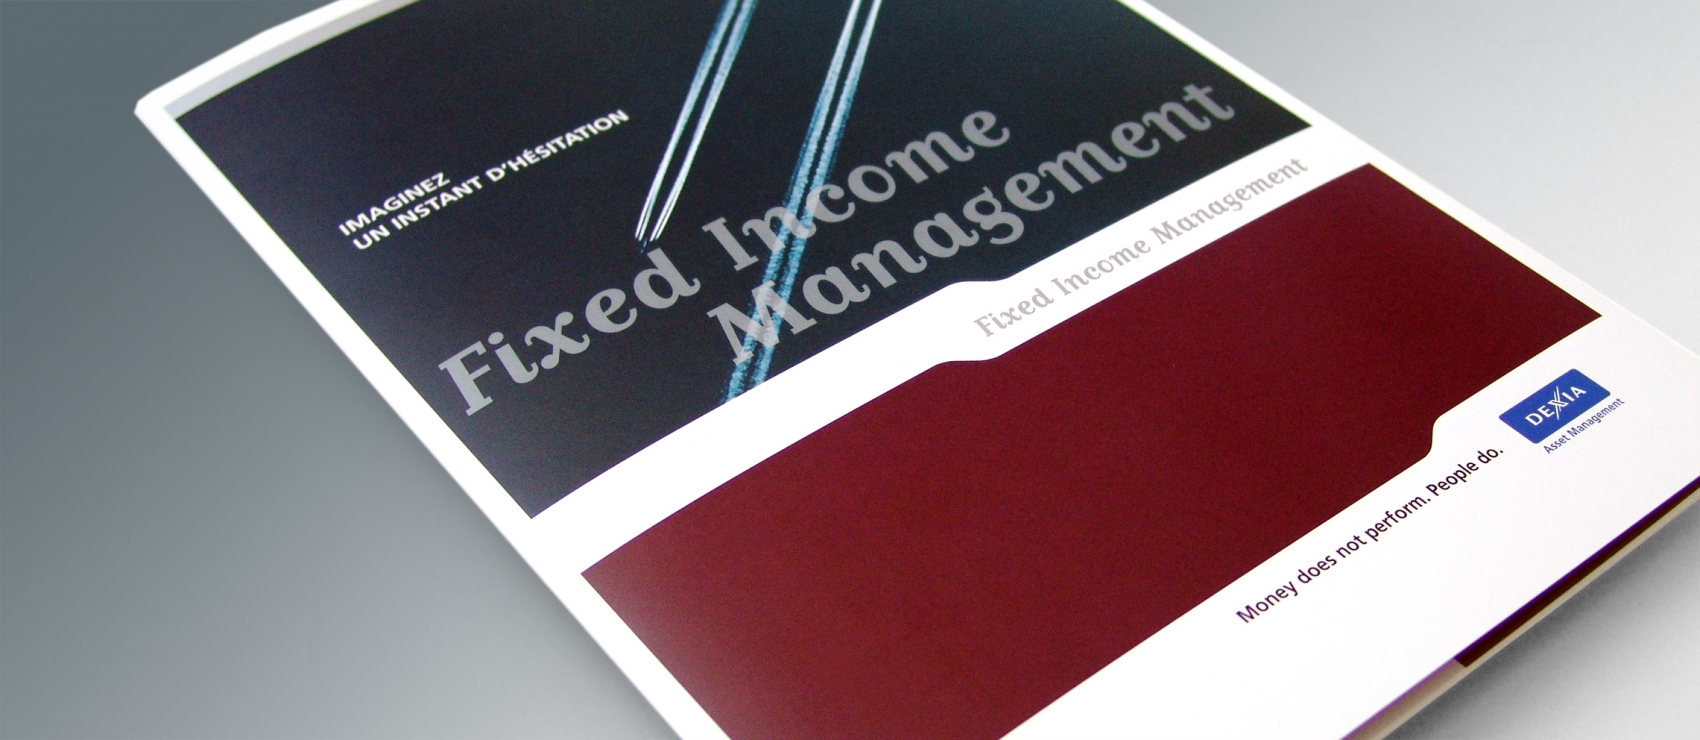 Dexia - Fixed Income Management brochure